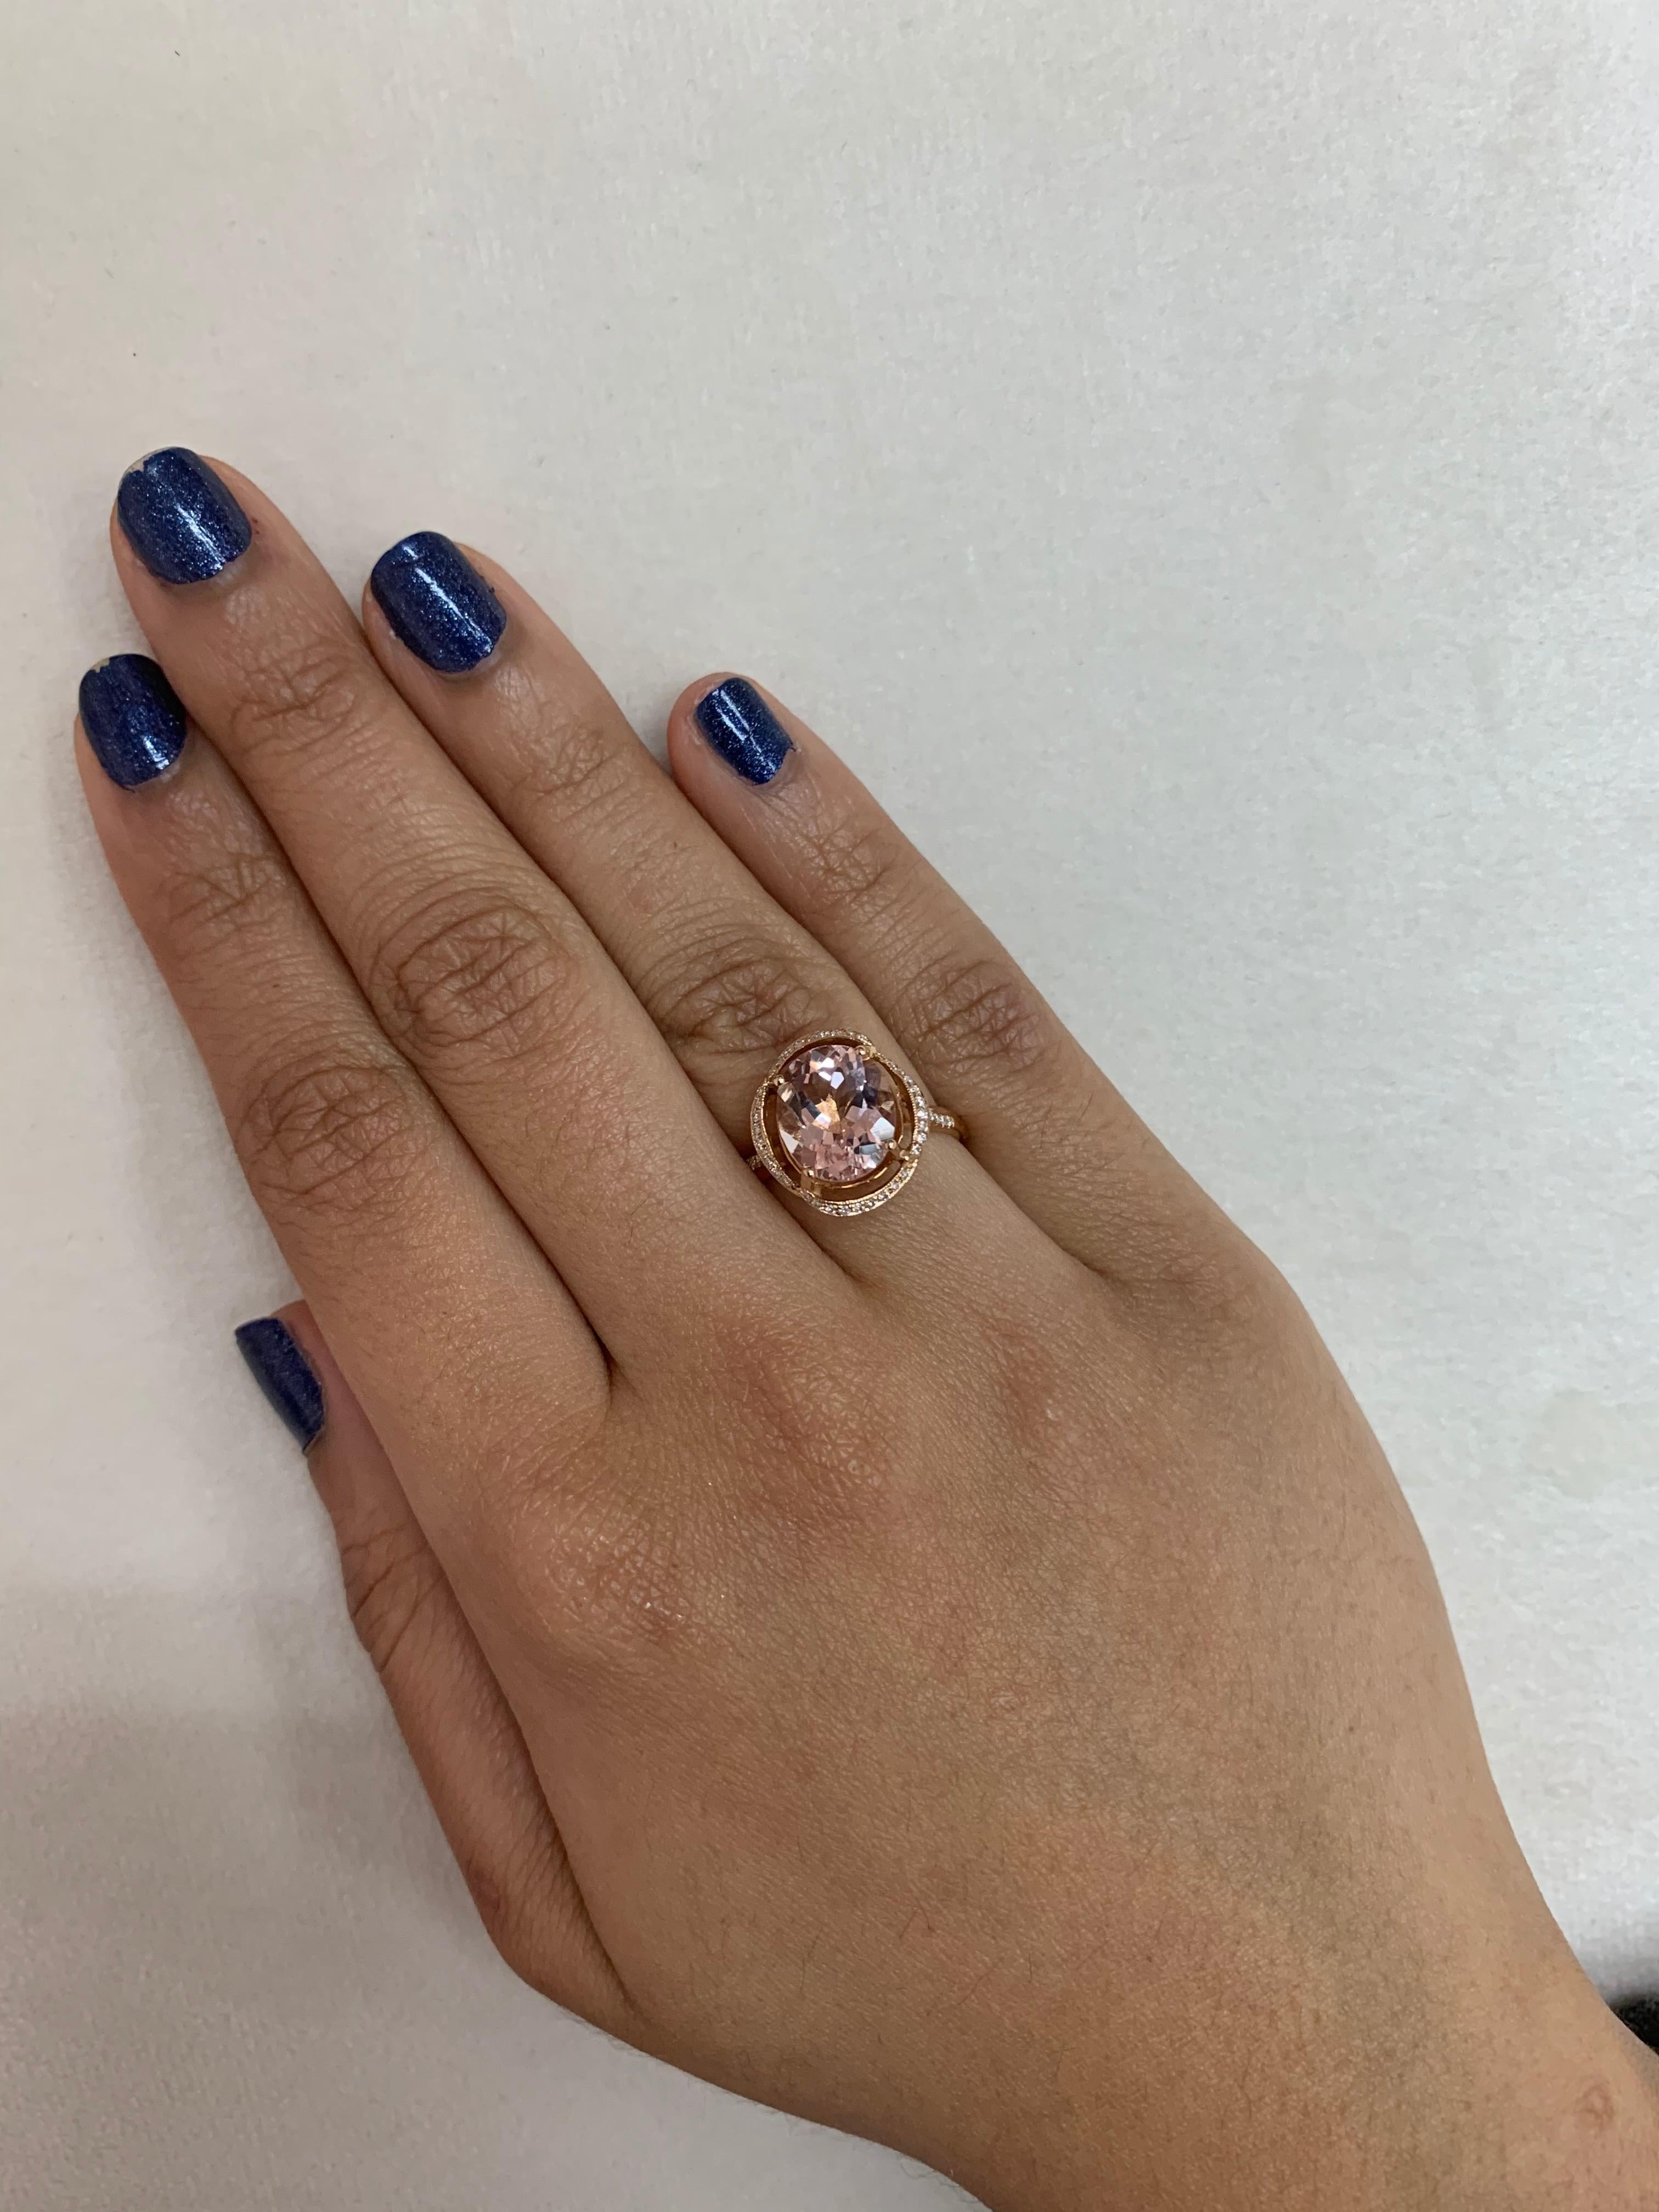 This collection features an array of magnificent morganites! Accented with diamonds these rings are made in rose gold and present a classic yet elegant look. 

Classic morganite ring in 18K rose gold with diamonds. 

Morganite: 2.94 carat oval